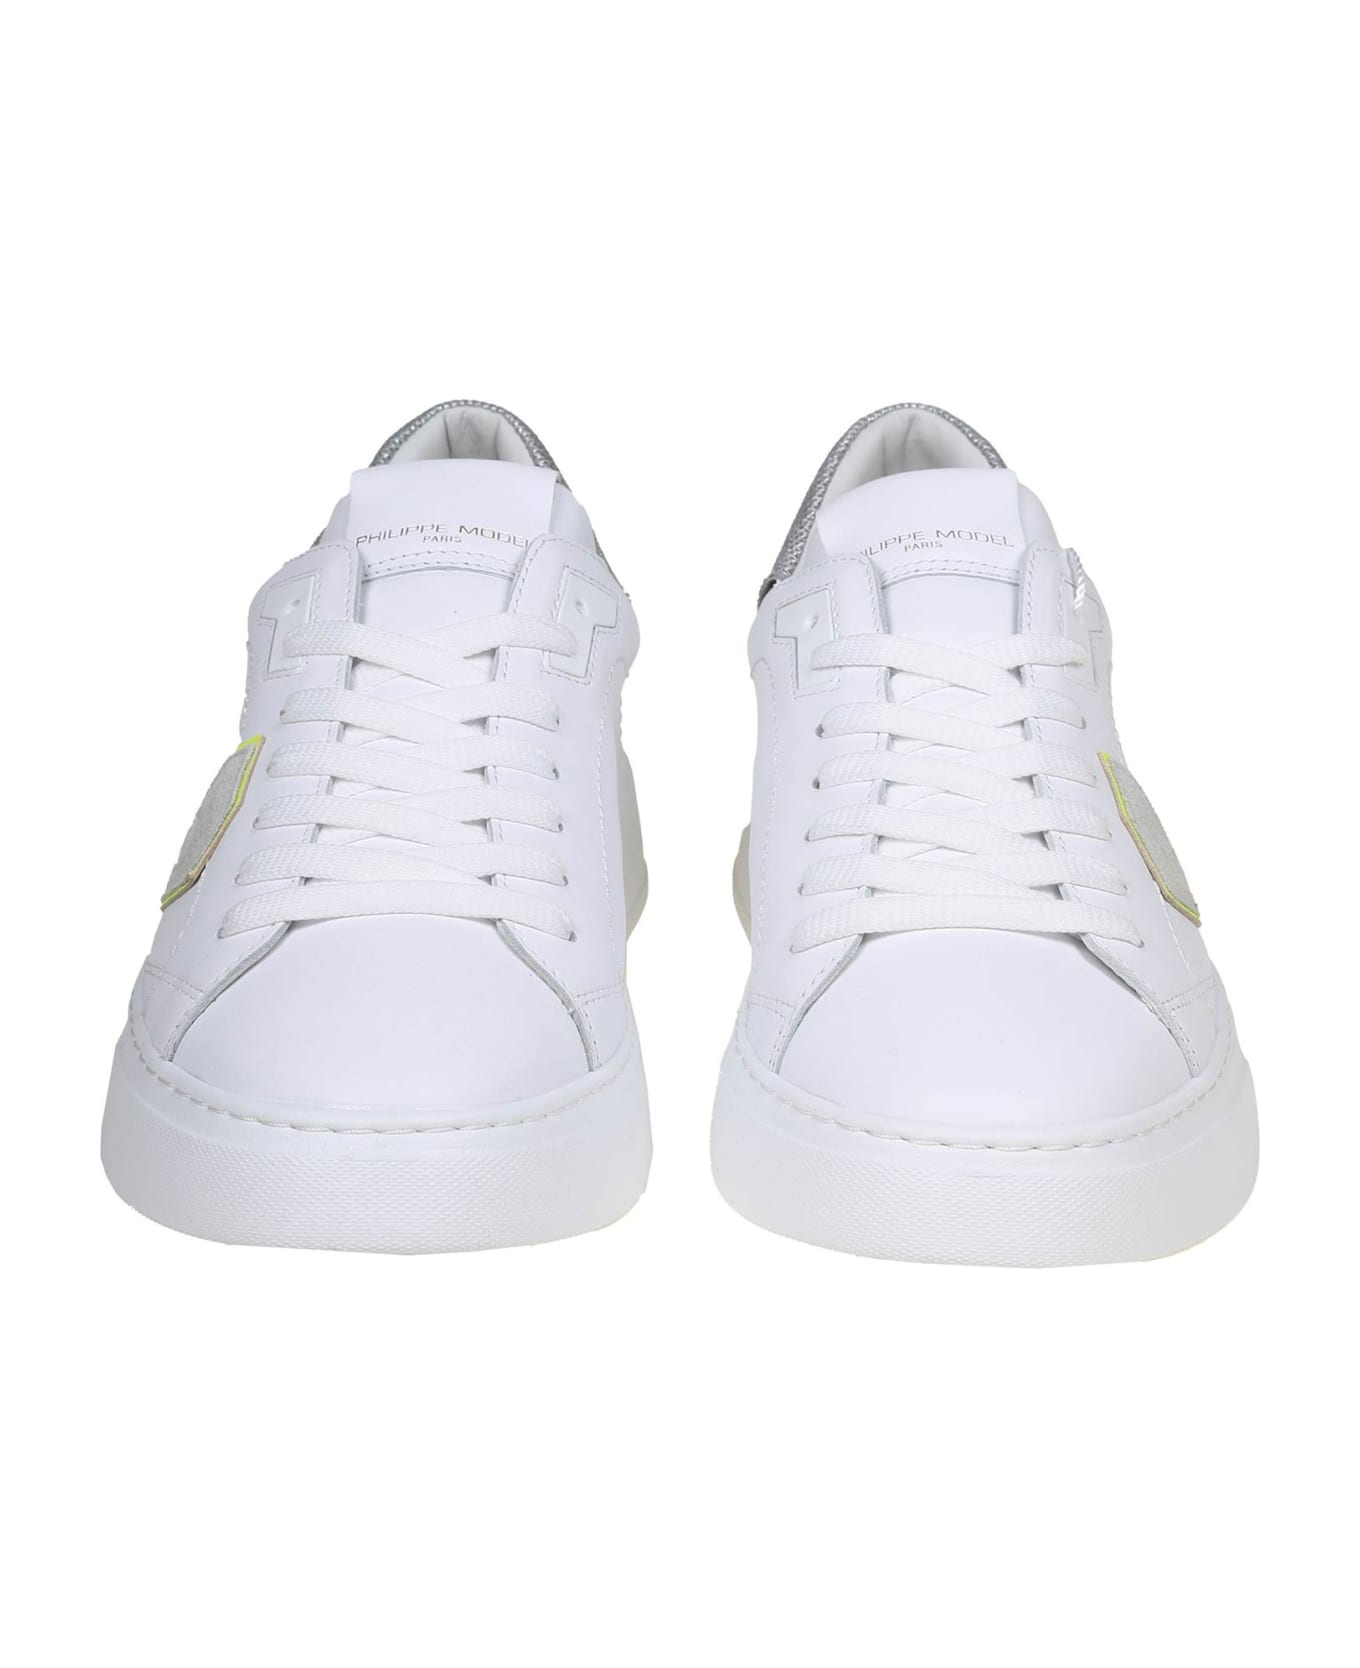 Philippe Model Temple Low Sneakers In White And Silver Leather - Blanc Argent